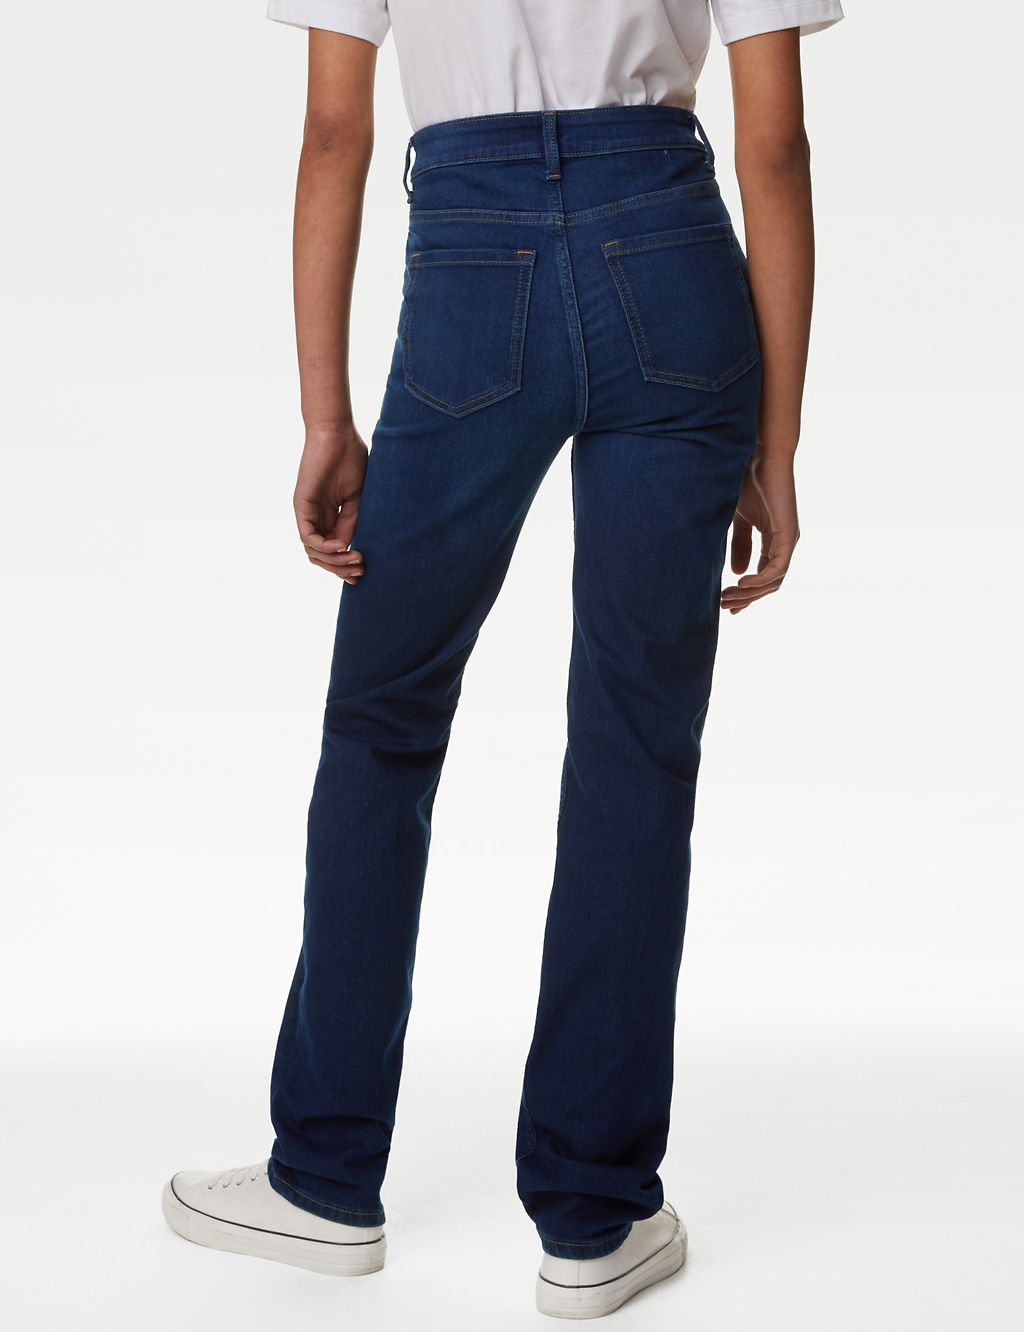 Sienna Straight Leg Jeans with Stretch 4 of 8